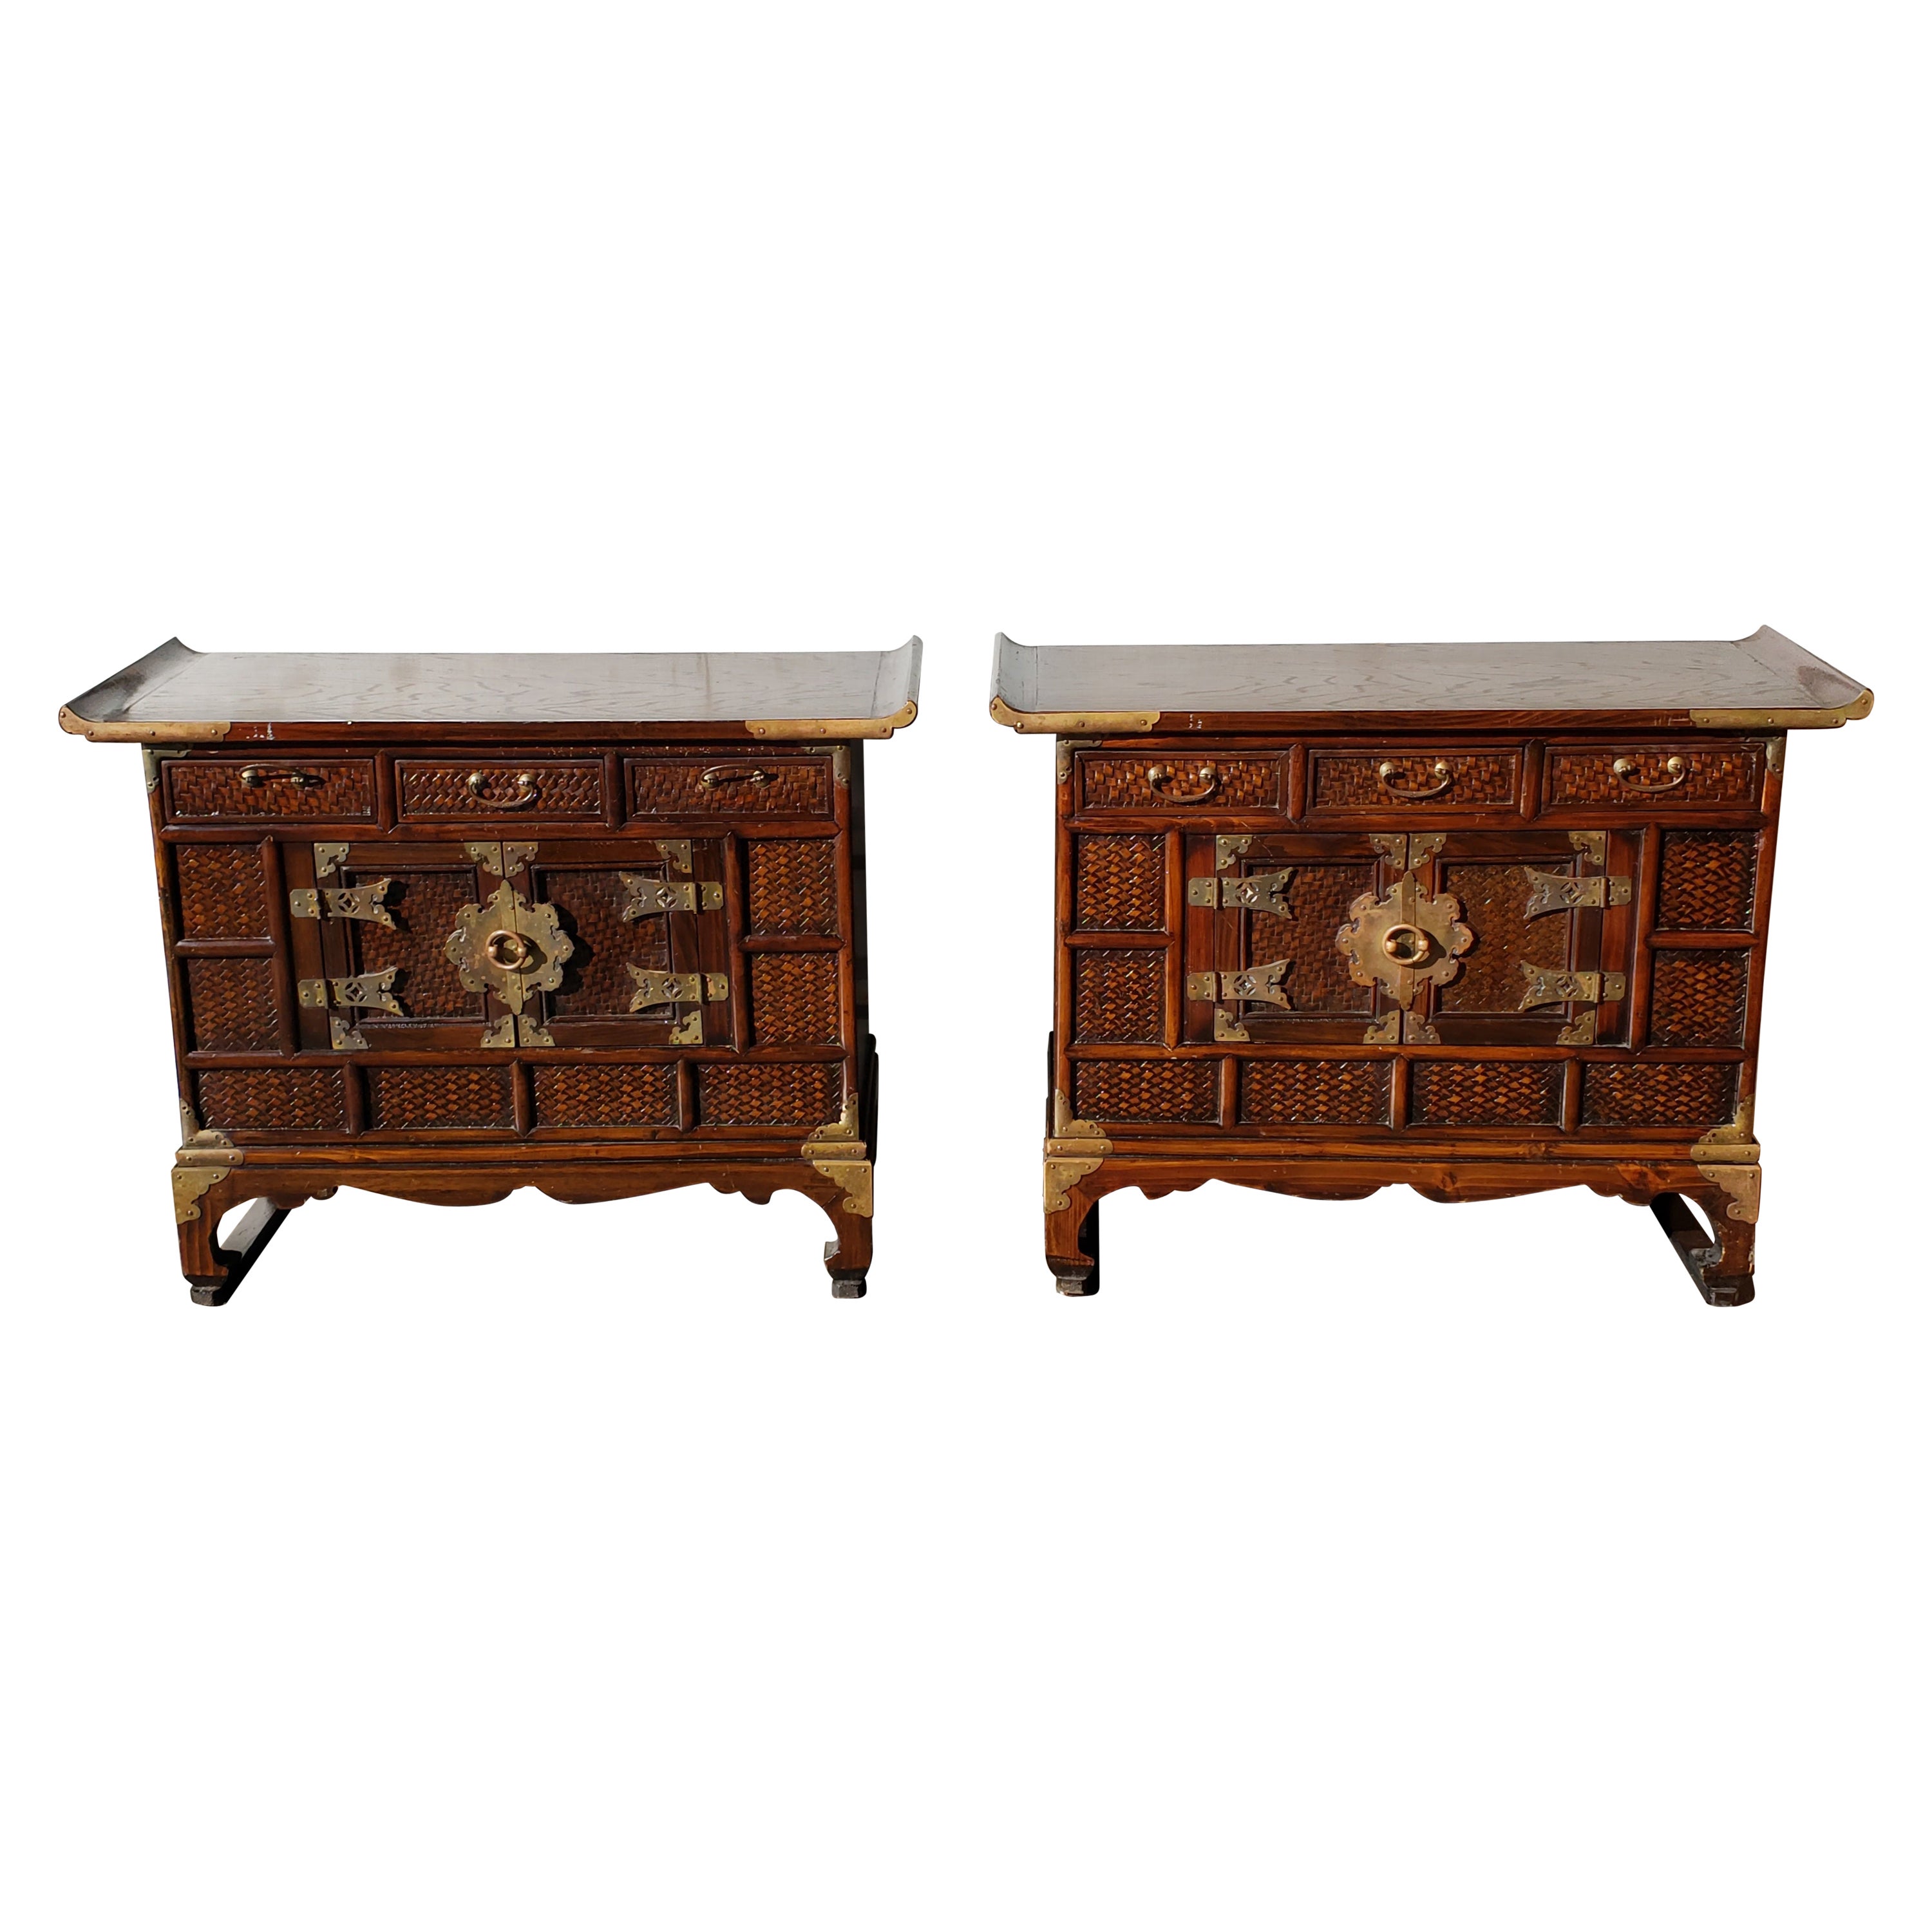 Asian Scholar's Bamboo and Braided Wicker Chests / Side Tables, C 1940s, a Pair